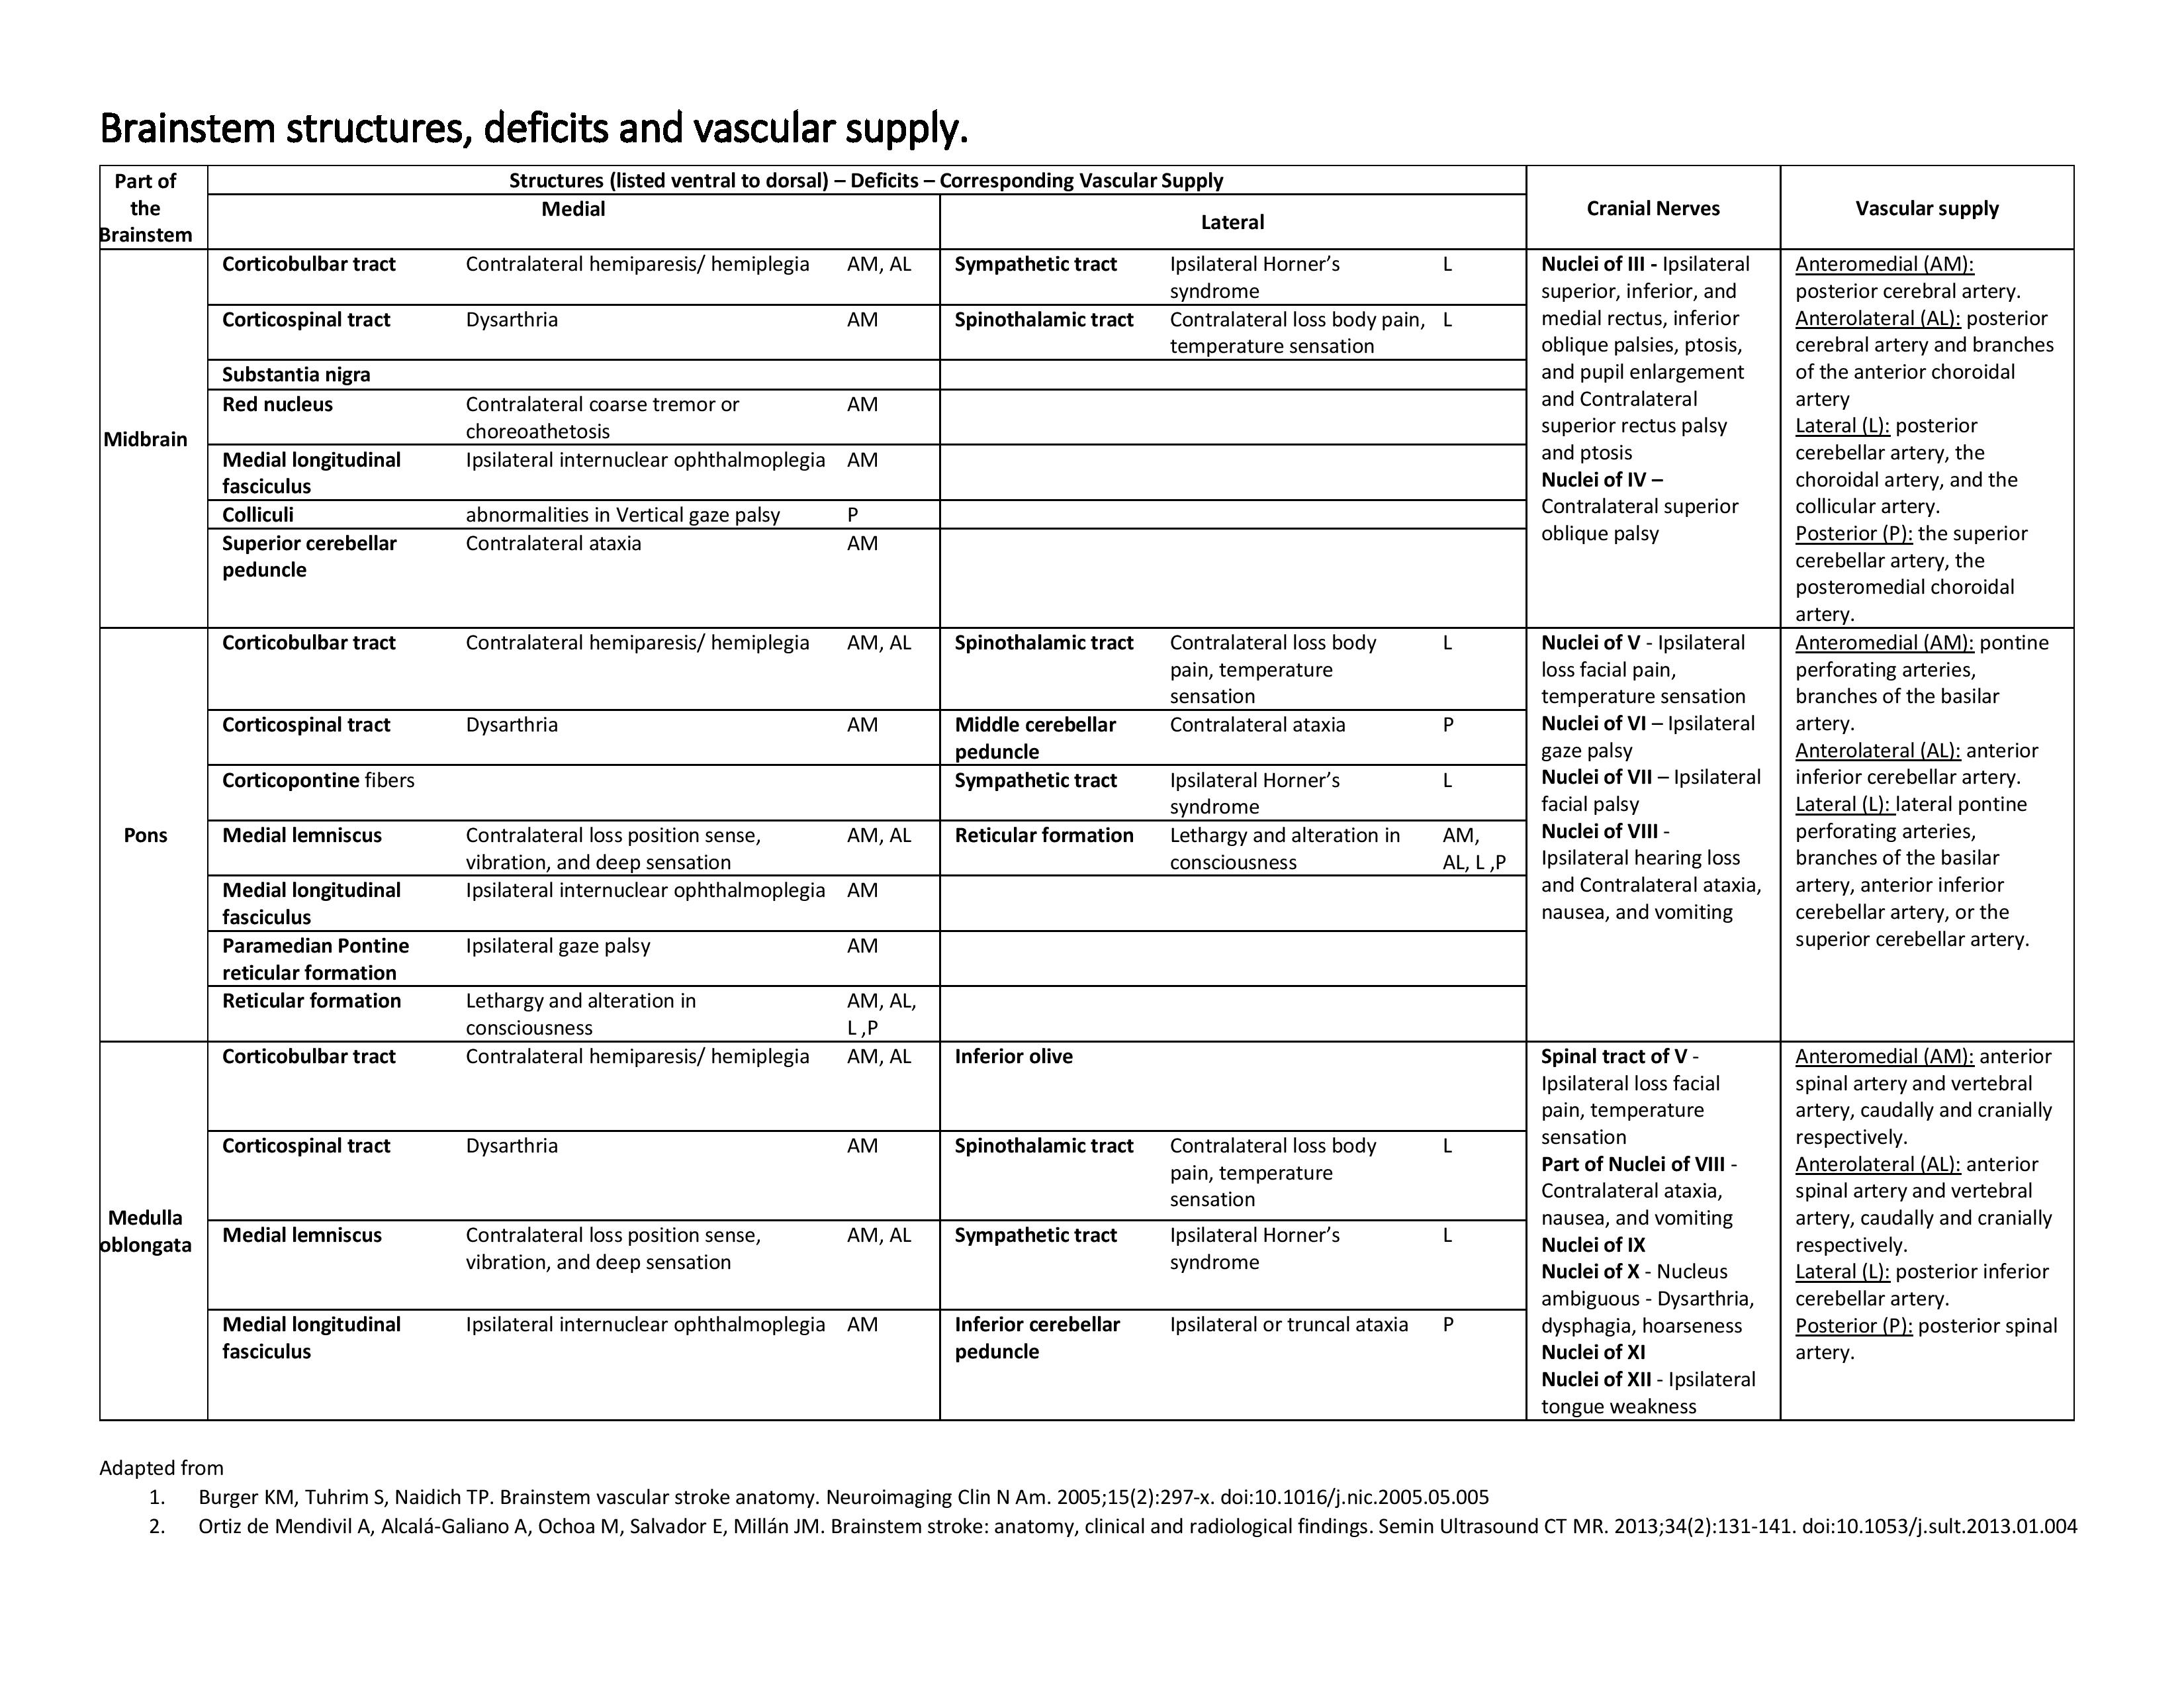 <p>Brainstem Structures, Deficits, and Vascular Supply Table